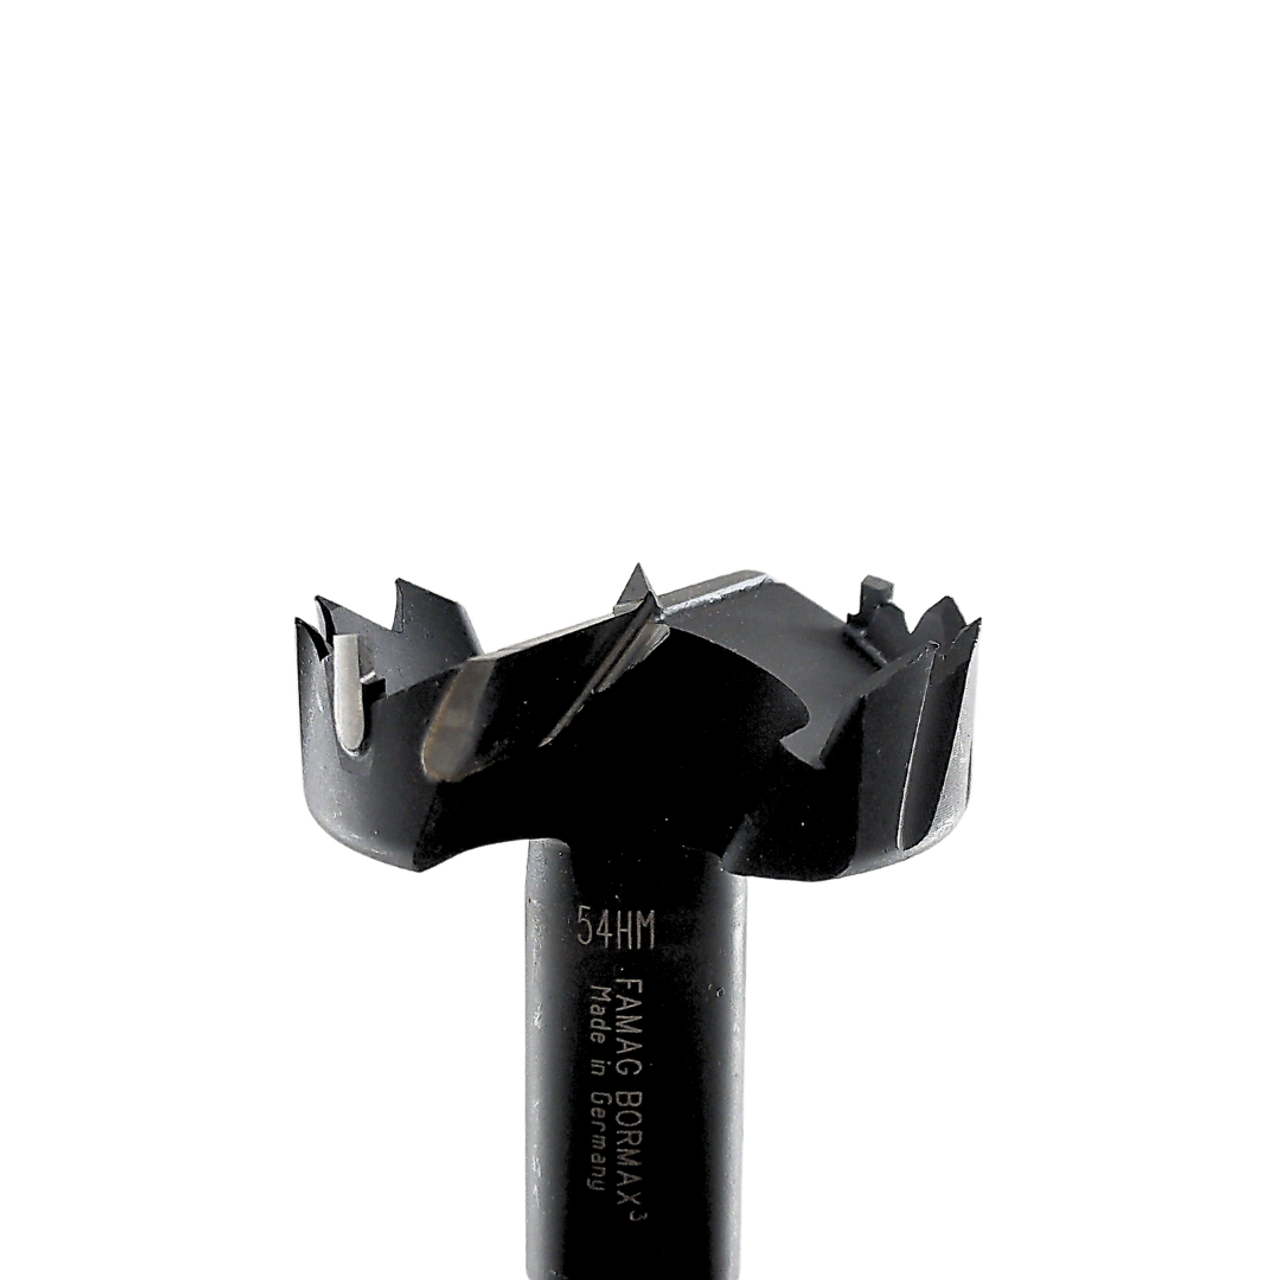 Craftsman Hardware, has a tools store where you can find Forstner Bits such as FAMAG 1614 Bormax Forstner Bits for the Woodworking Industry in Australia and New Zealand